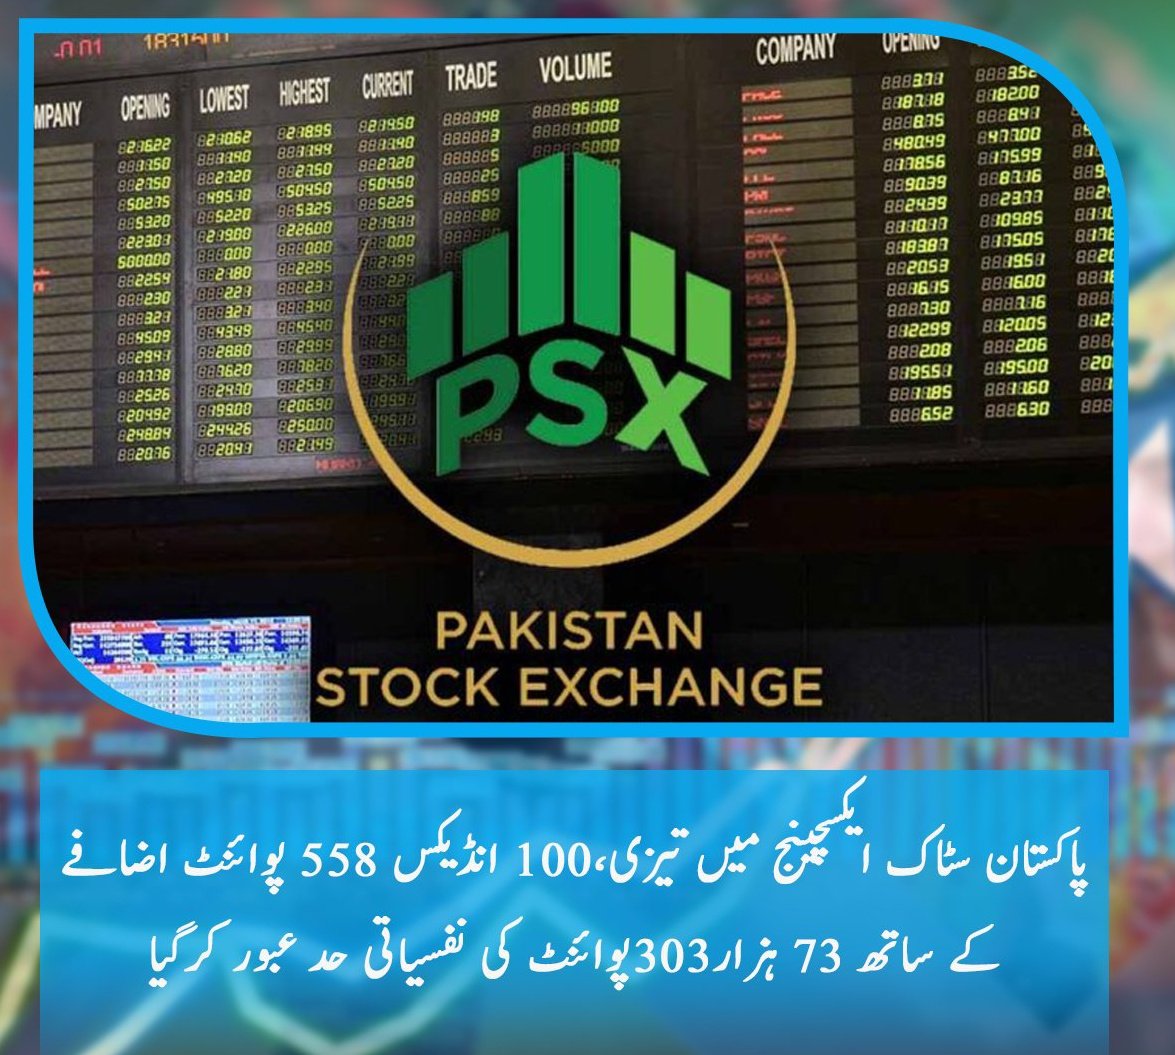 Hundred Index crossed the psychological threshold of 73 thousand points New history in Pakistan Stock Exchange , Thanks to the positive economic policies of Prime Minister Mian Shahbaz Sharif , Pakistan is becoming stable #PMLNRevivingPakistan